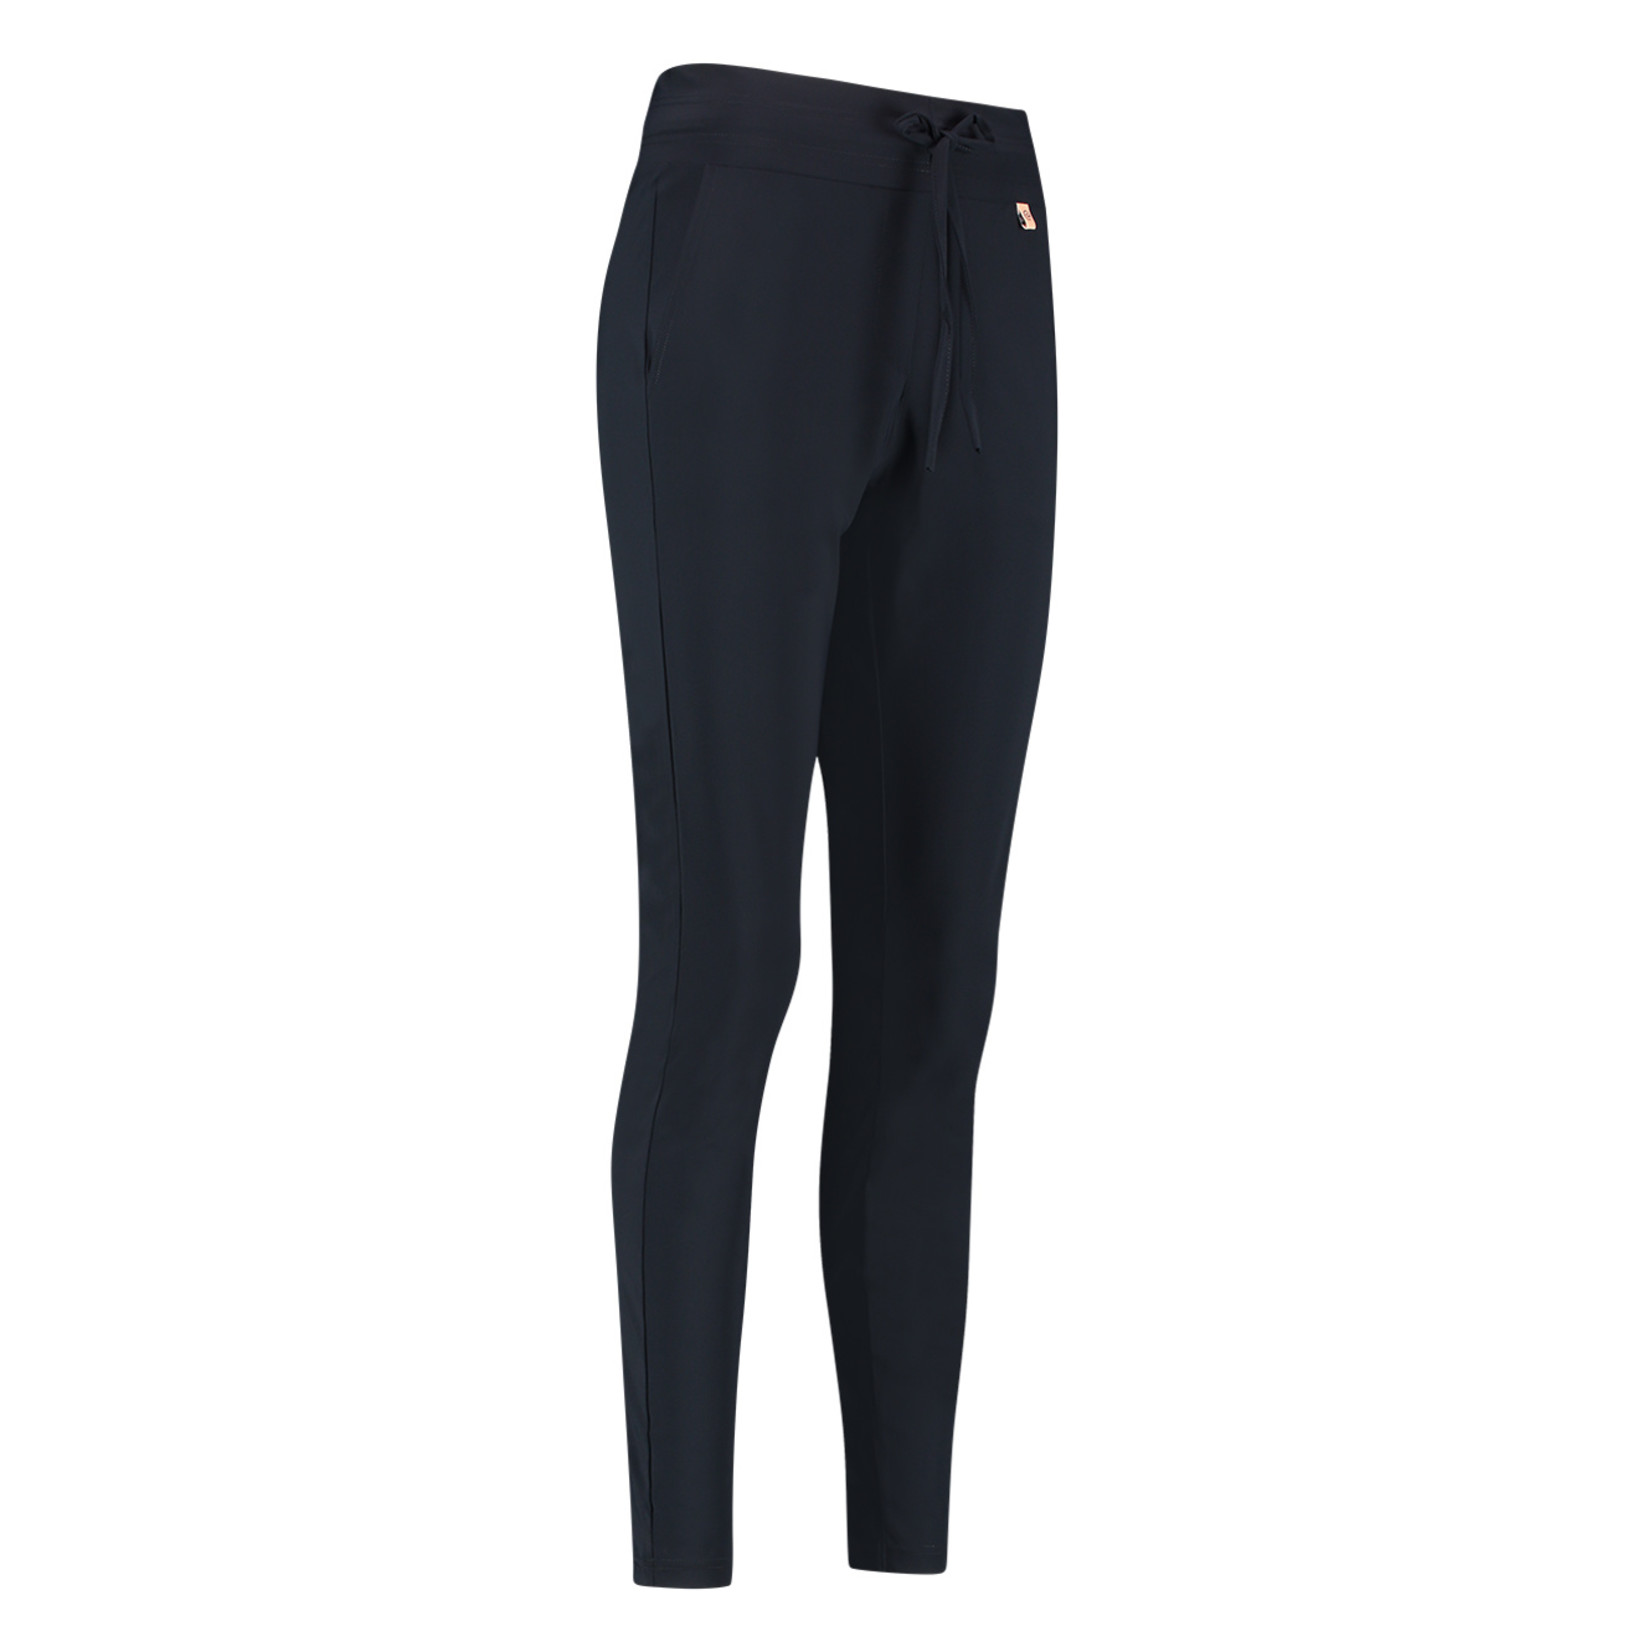 Spyder Ladies' Tight with Pockets 1619997 (Size XL, Black) 